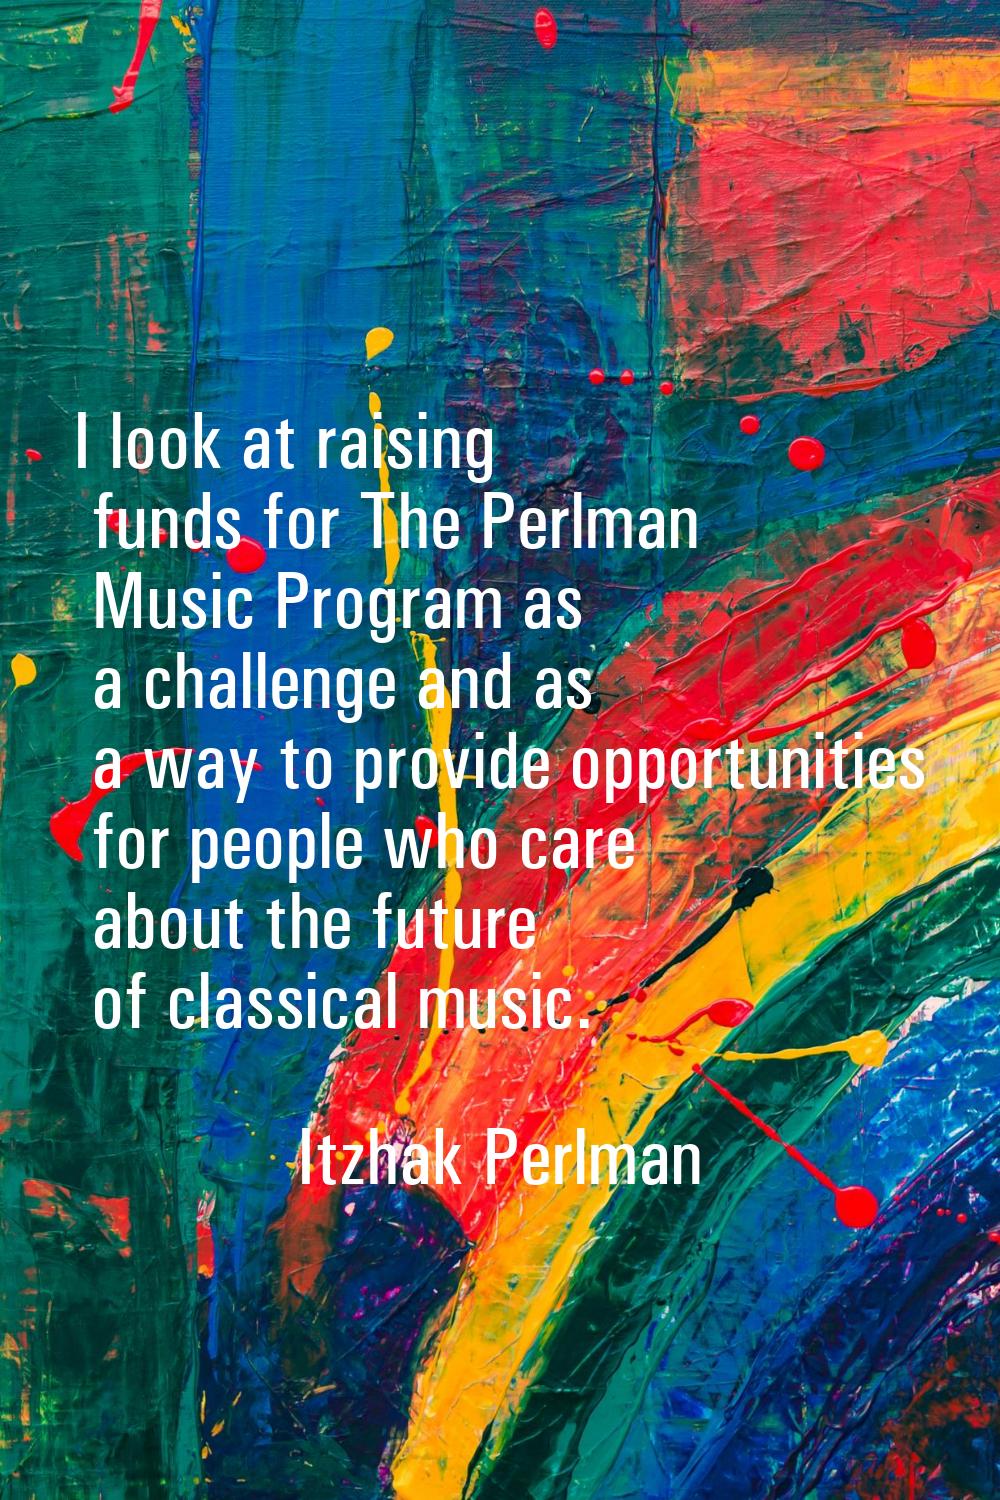 I look at raising funds for The Perlman Music Program as a challenge and as a way to provide opport